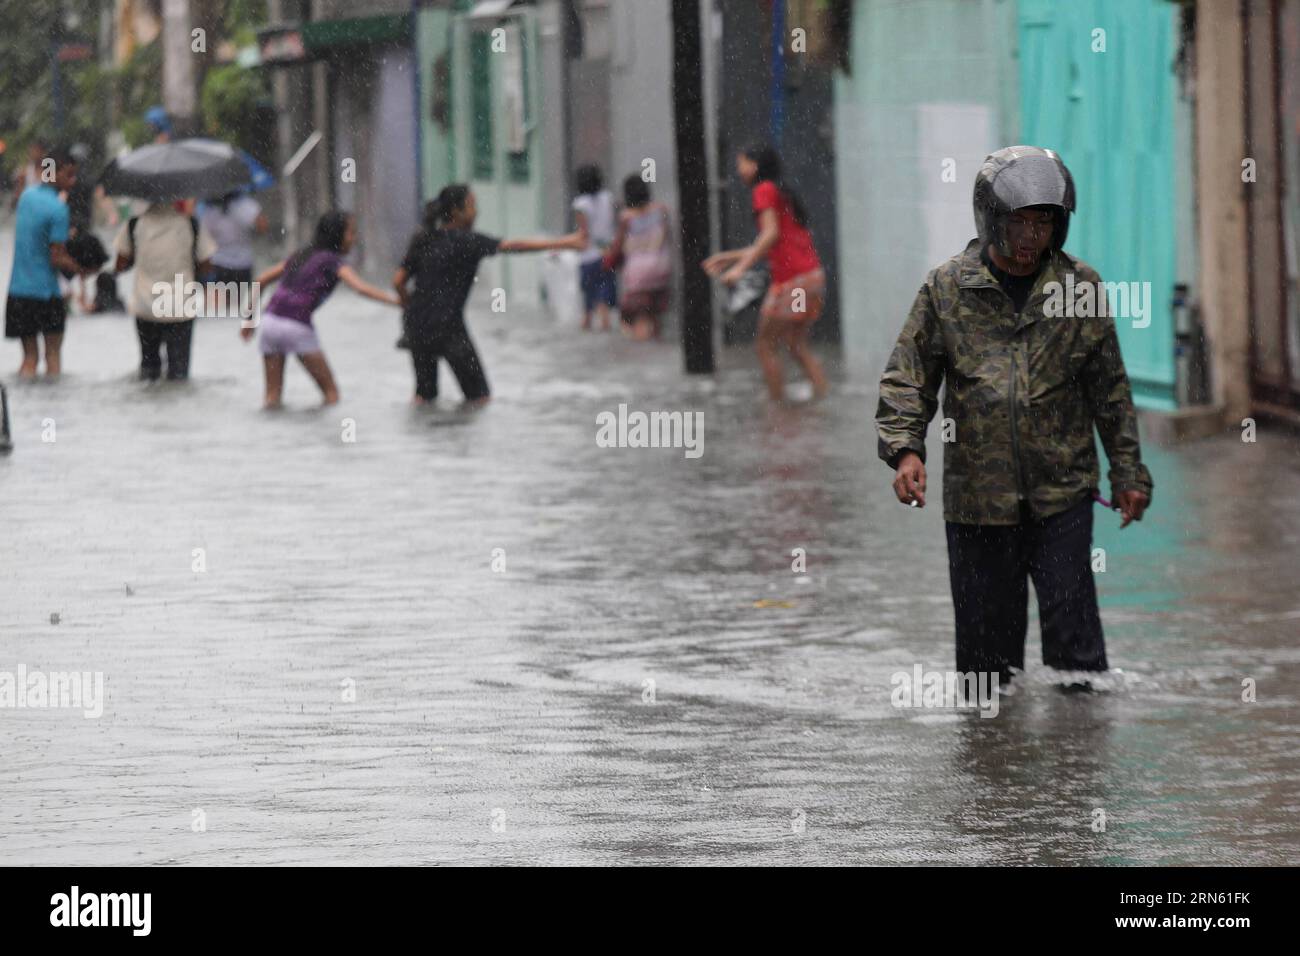 (150708) -- MALABON CITY, July 8, 2015 -- Residents wade through a flooded street in Malabon City, the Philippines, July 8, 2015. Typhoon Chan-hom (local name Falcon) with maximum sustained winds of 130 kph near the center and gustiness of up to 160 kph brought heavy rain, strong winds, lightning and floods in northern Philippines, causing school and office suspensions, and cancellations in air and sea travel. ) (lrz) PHILIPPINES-MALABON CITY-FLOOD RouellexUmali PUBLICATIONxNOTxINxCHN   150708 Malabon City July 8 2015 Residents Calf Through a flooded Street in Malabon City The Philippines July Stock Photo